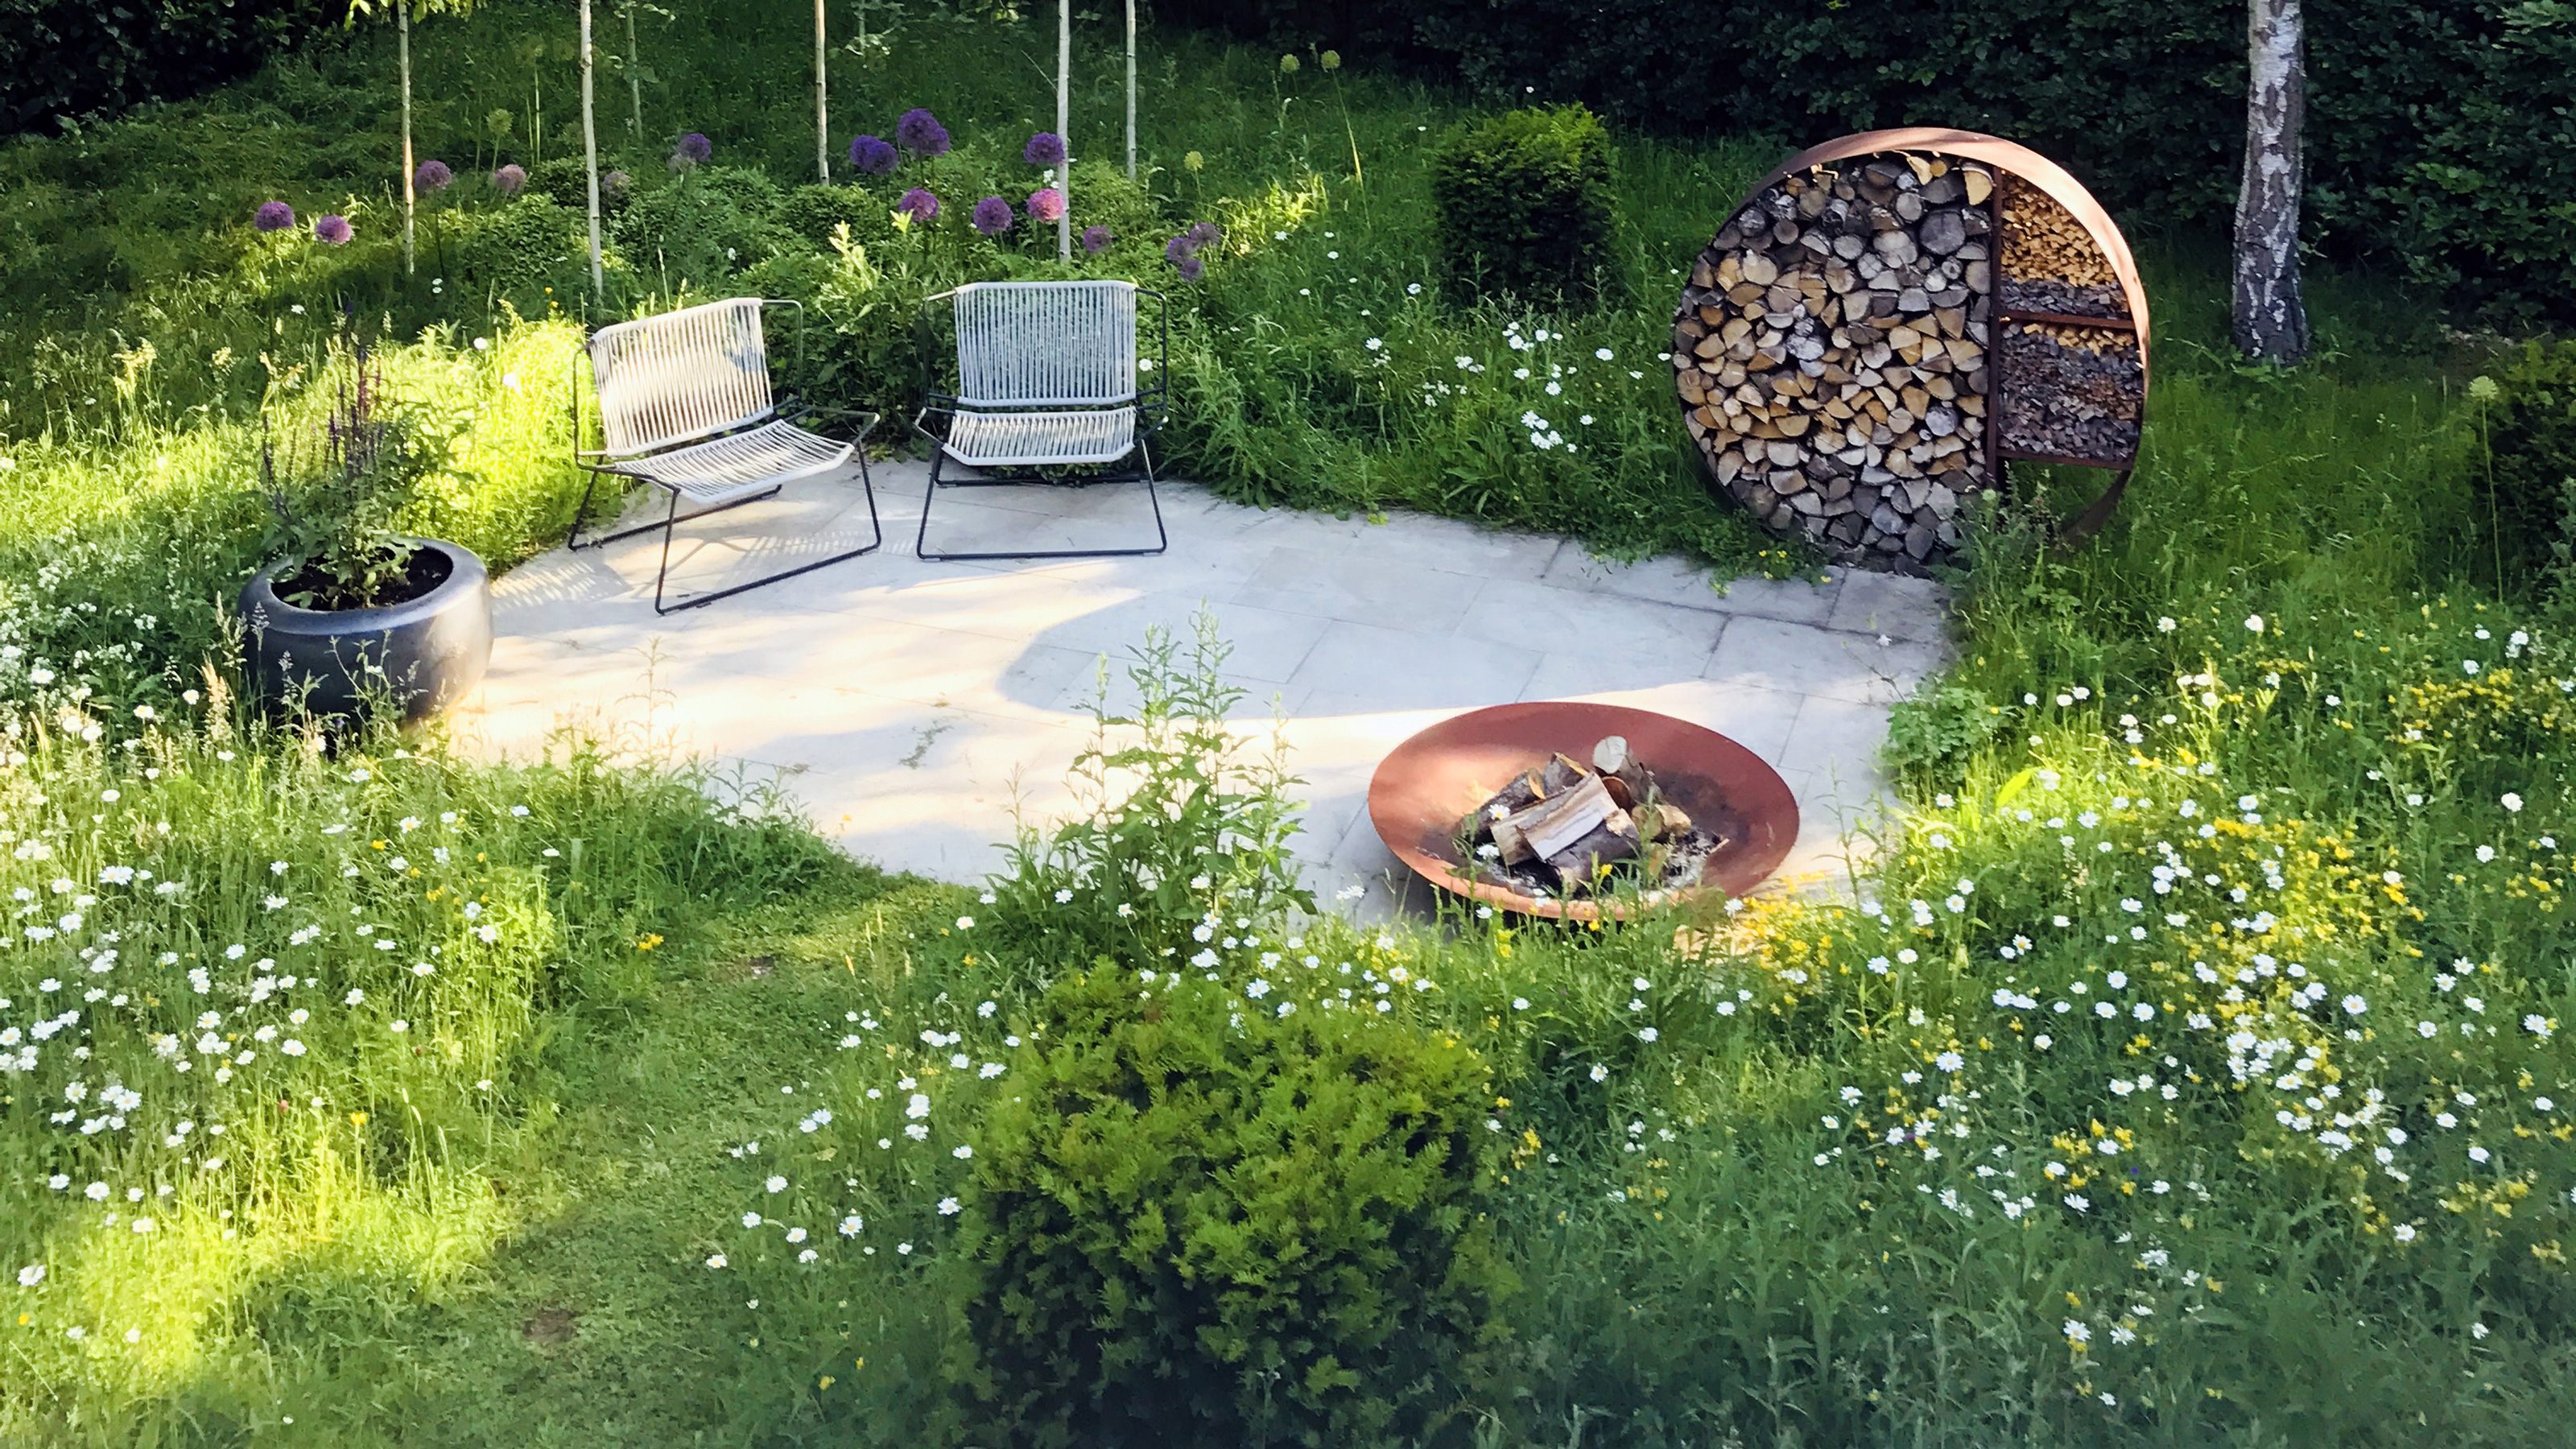 Image of Circle garden bed made of logs with wildflowers